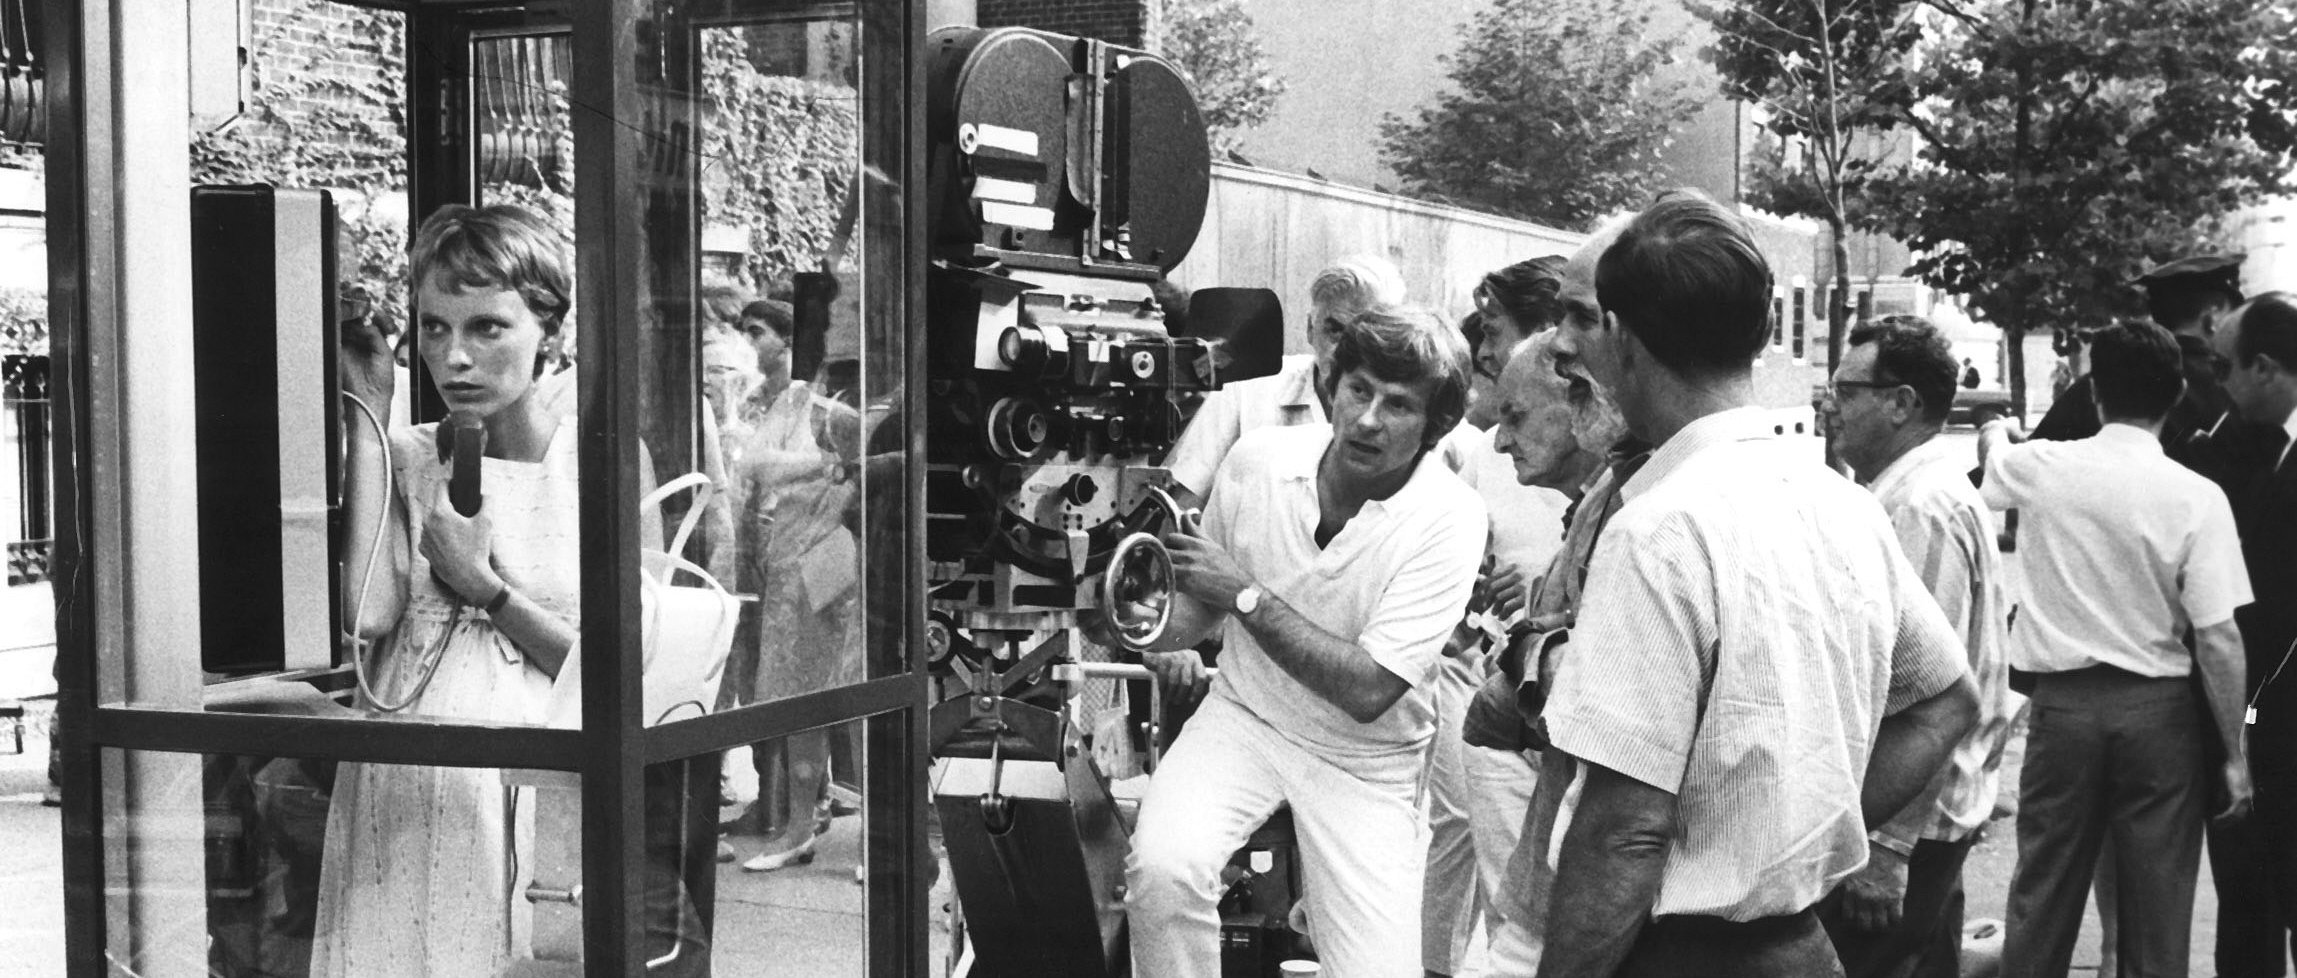 Beyond The Frame: Rosemary's Baby - The American Society of Cinematographers